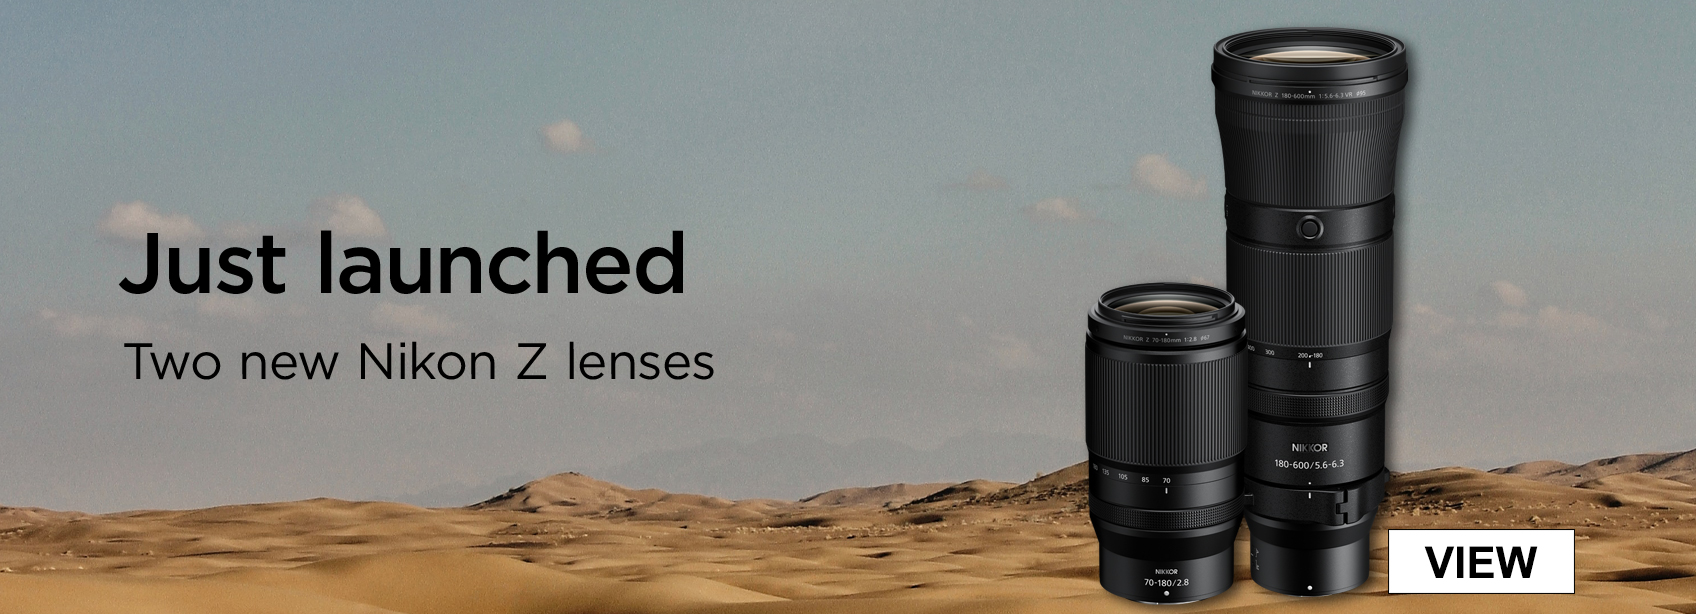 Just launched - Two new Nikon Z lenses